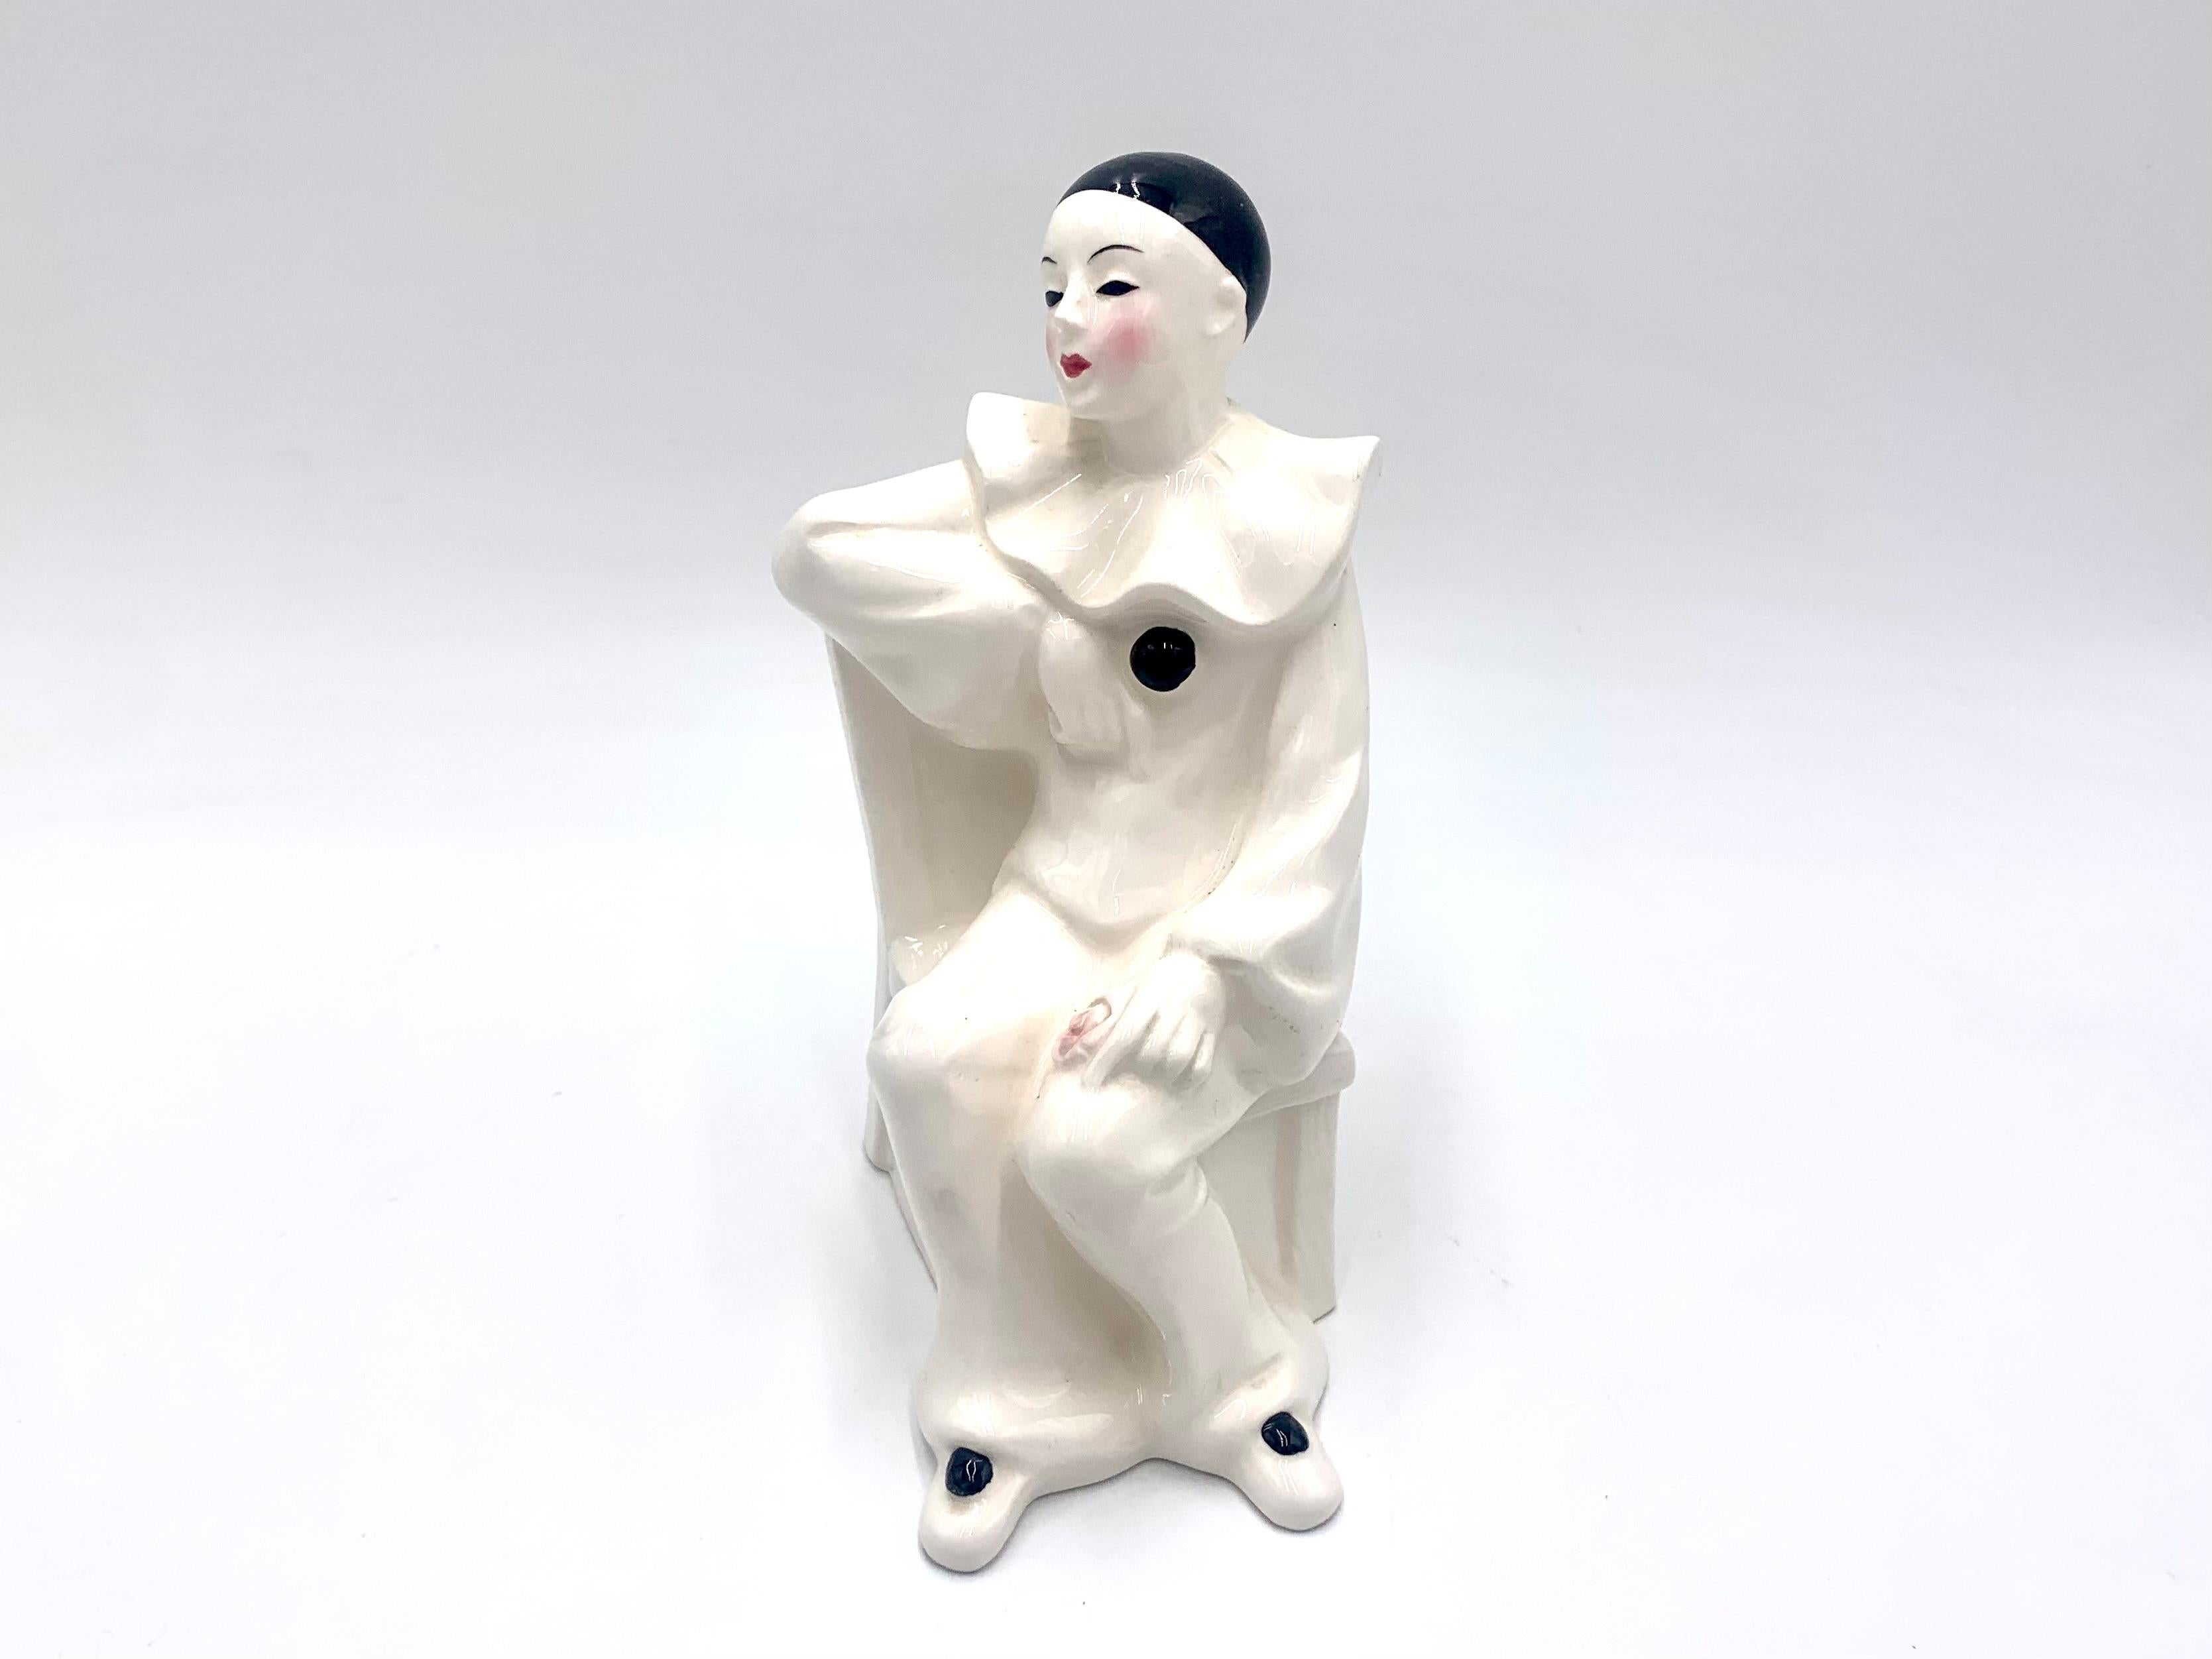 Ceramic Harlequin figurine. Not signed. Probably produced in Germany at the turn of the 1970s and 1980s. XX century. The figurine is in perfect condition.

Measures: height: 17cm; width 11cm; depth 6cm.